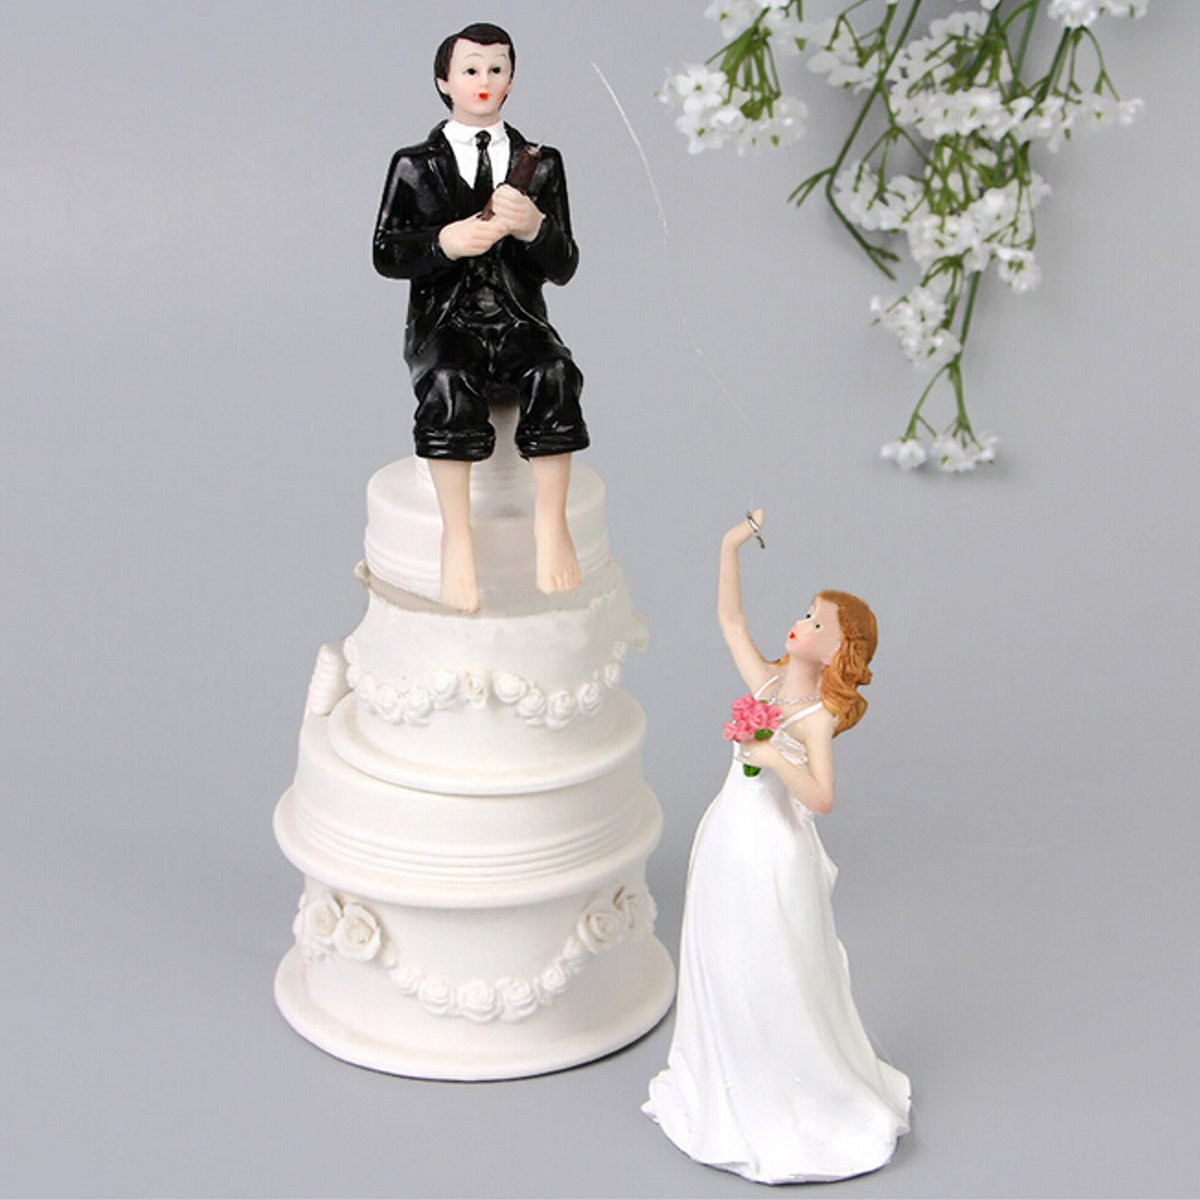 Wedding Cake Toppers Bride And Groom
 Romantic Wedding Cake Toppers Figure Bride and Groom